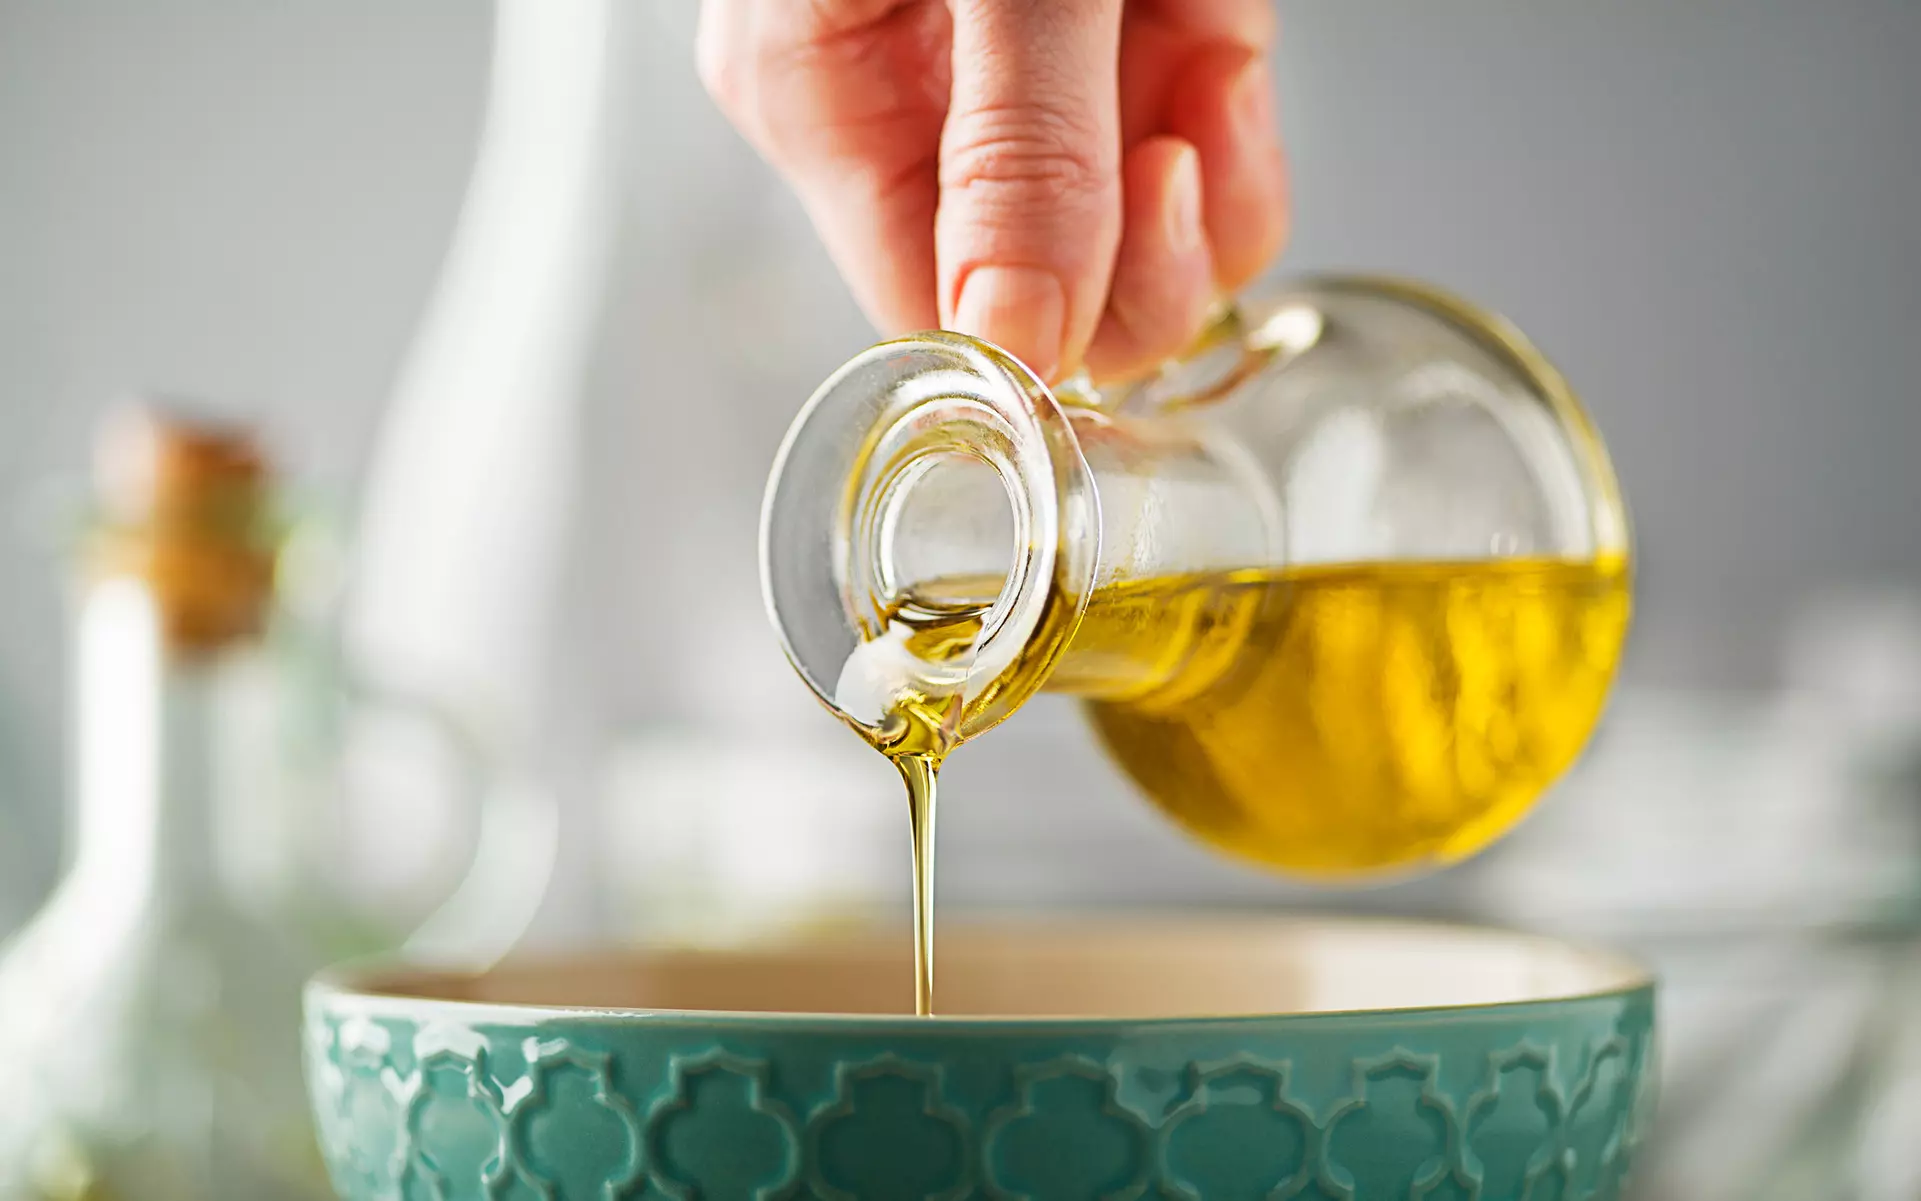 Edible Oils Market is Estimated to Witness High Growth Owing to Changing Consumer Preferences